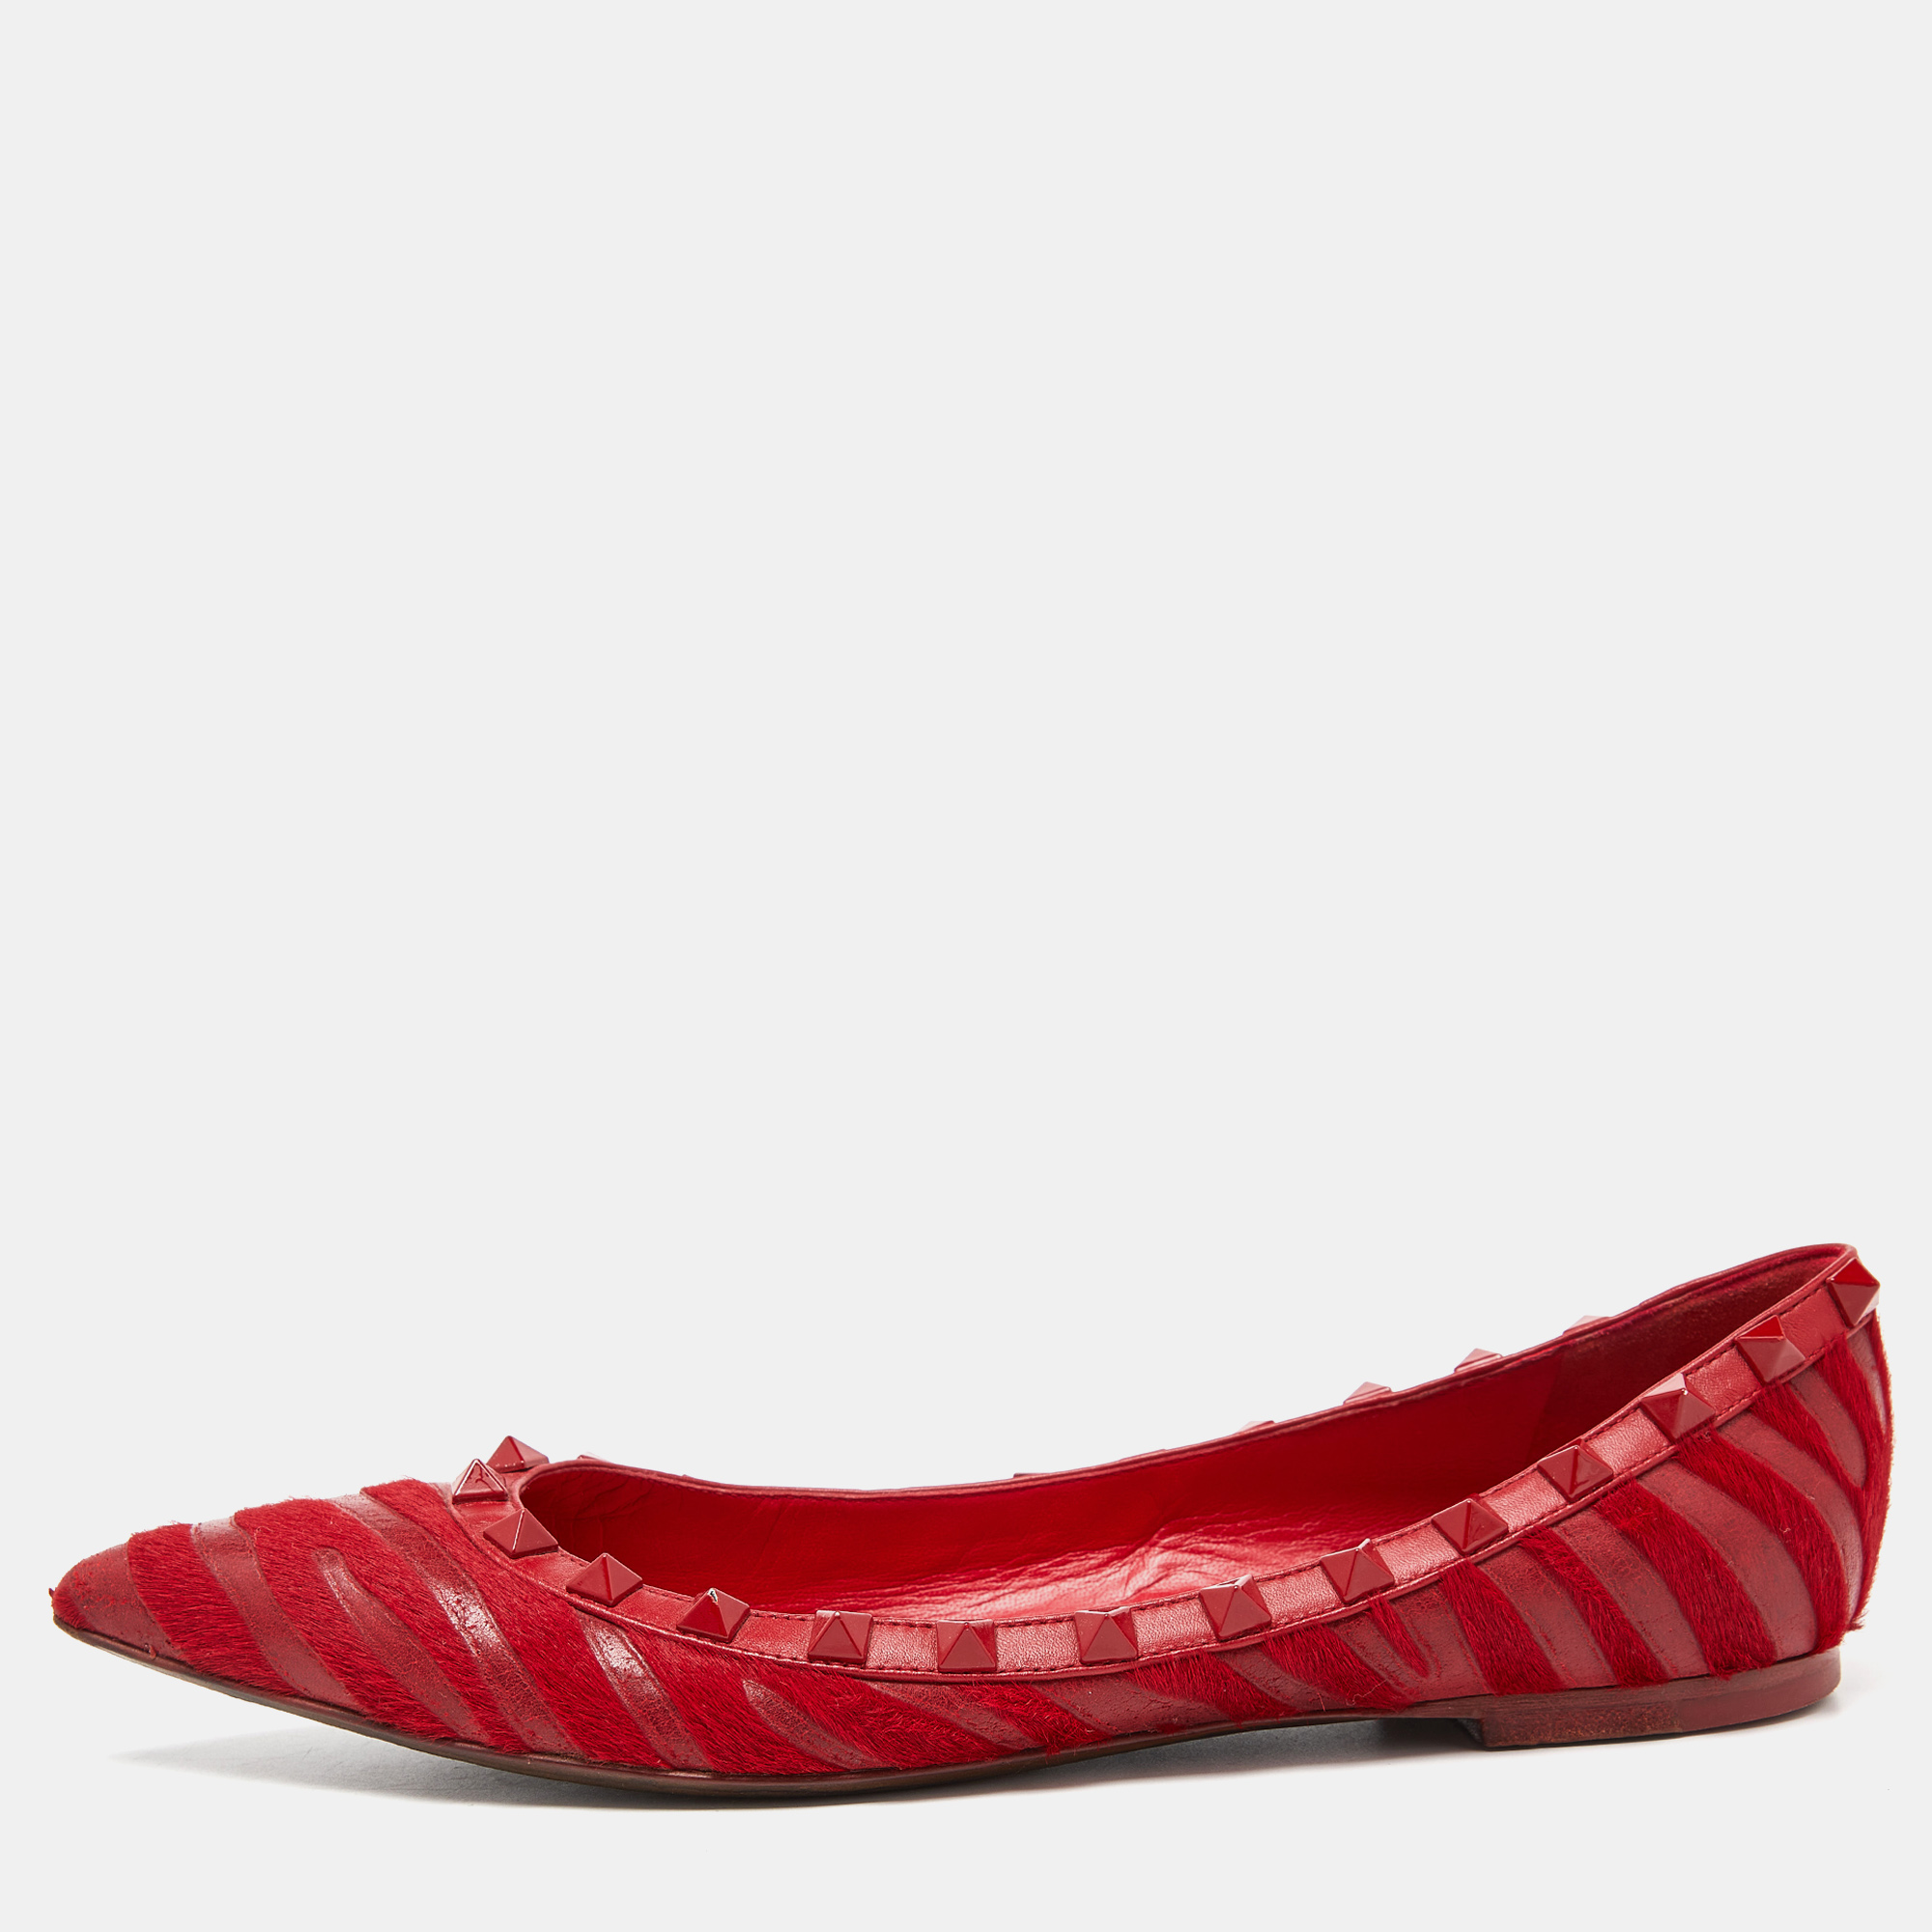 Valentino red calfhair and leather studded ballet flats size 37